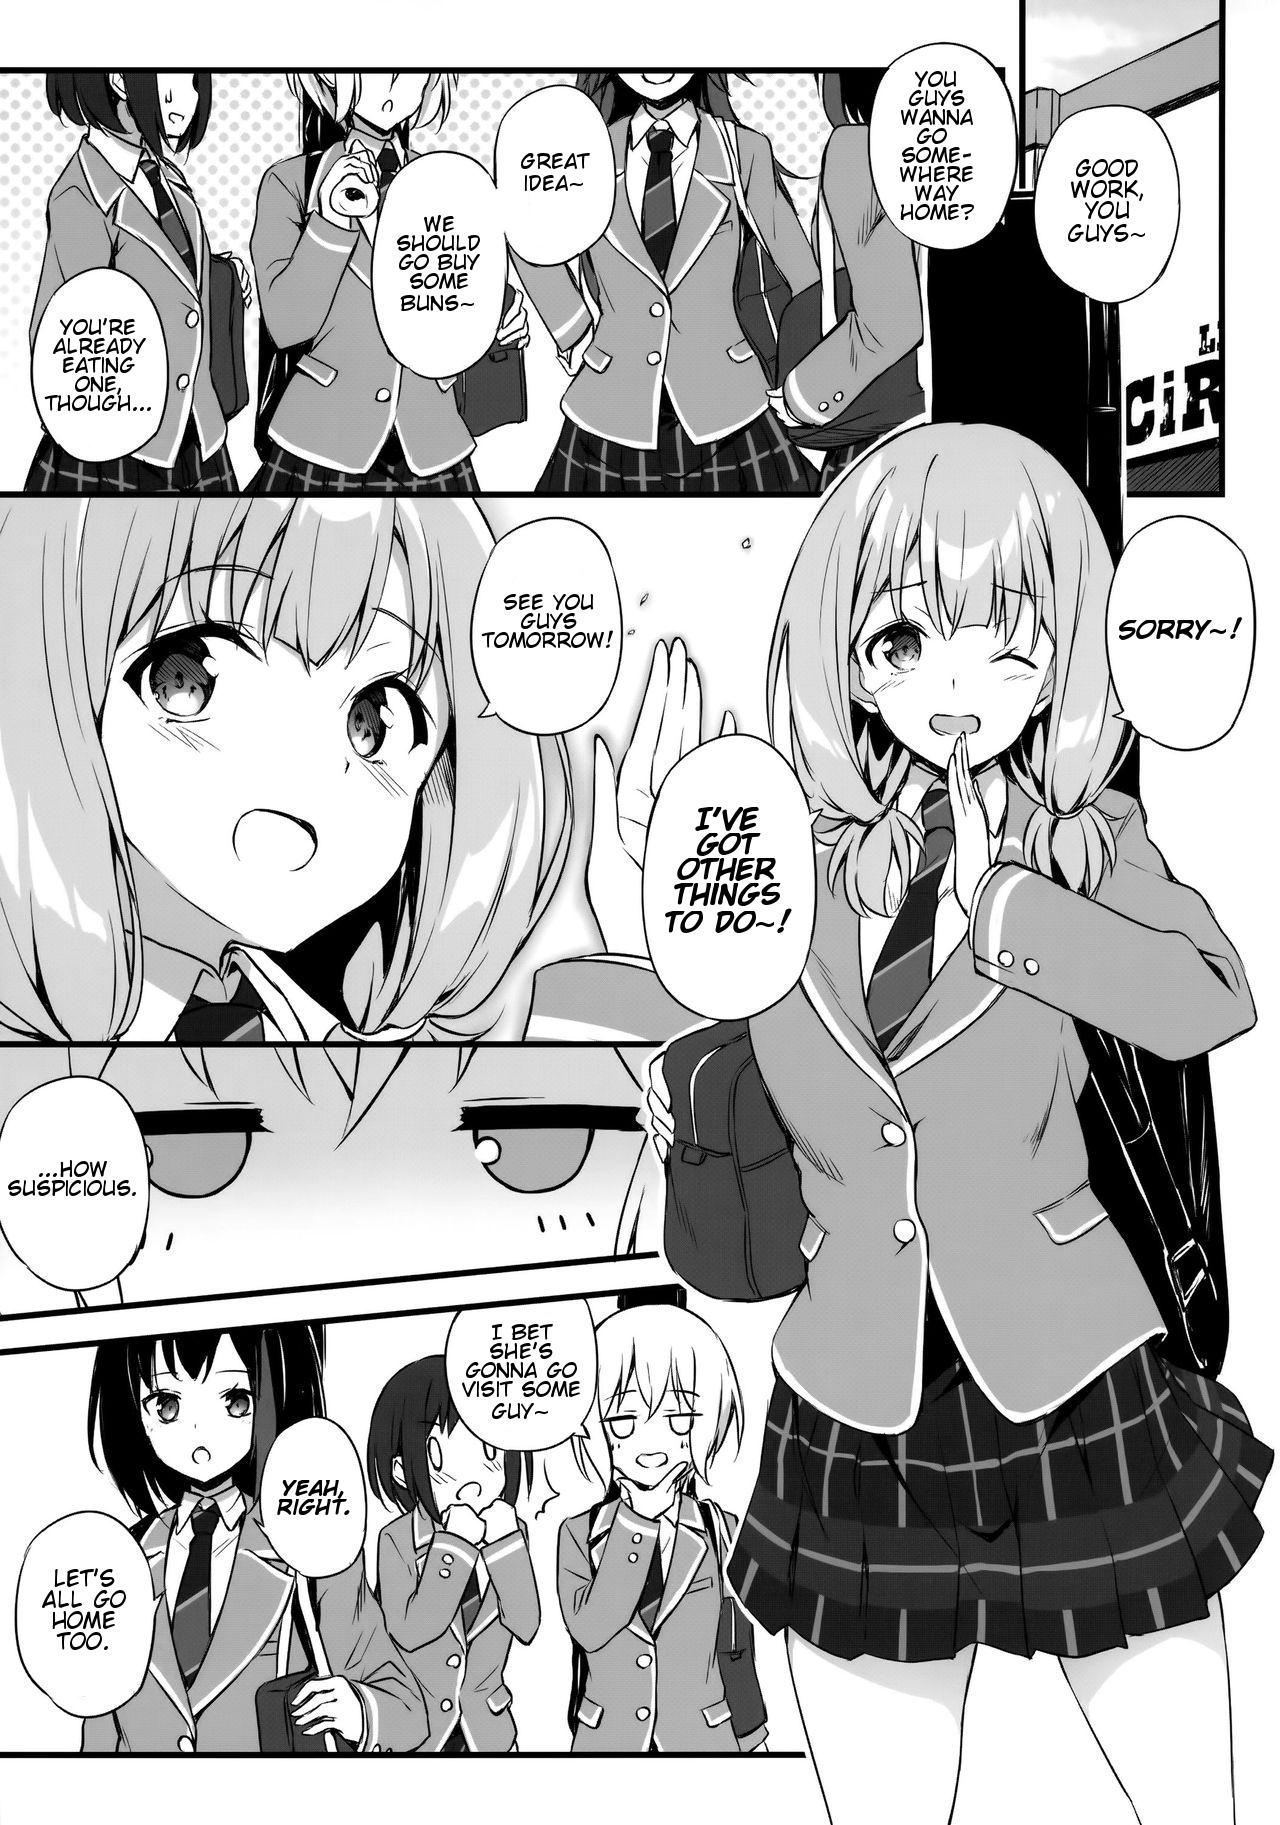 Cavala HONEY SCORE - Bang dream 18 Year Old Porn - Page 4